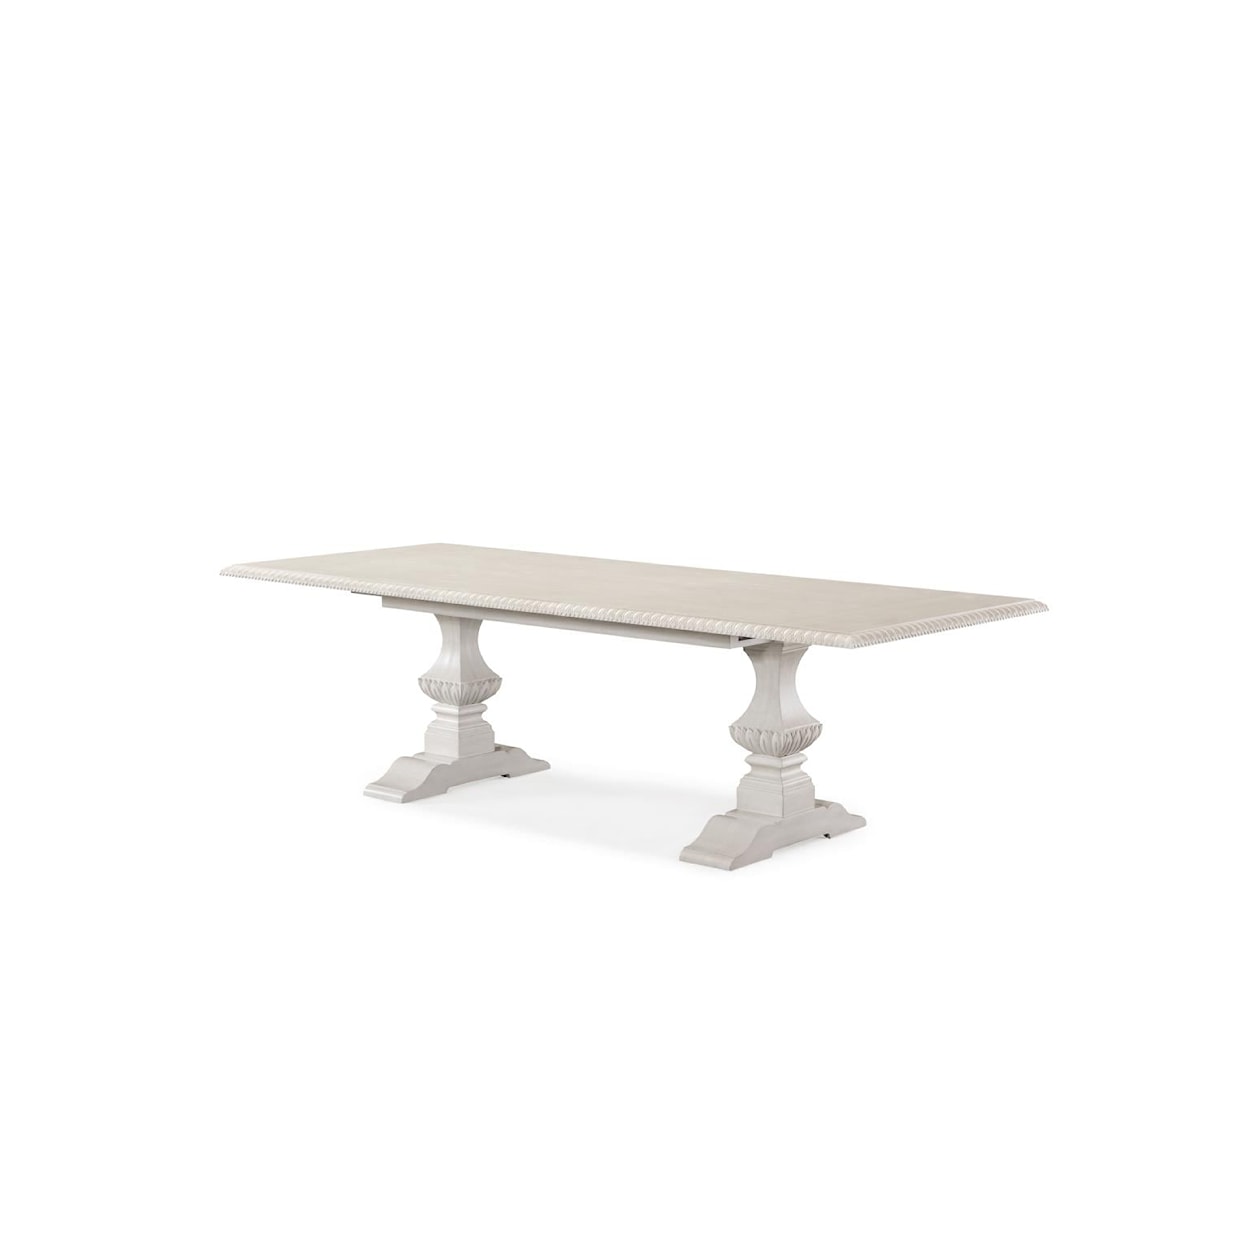 Trisha Yearwood Home Collection by Legacy Classic Jasper County Double Pedestal Dining Table